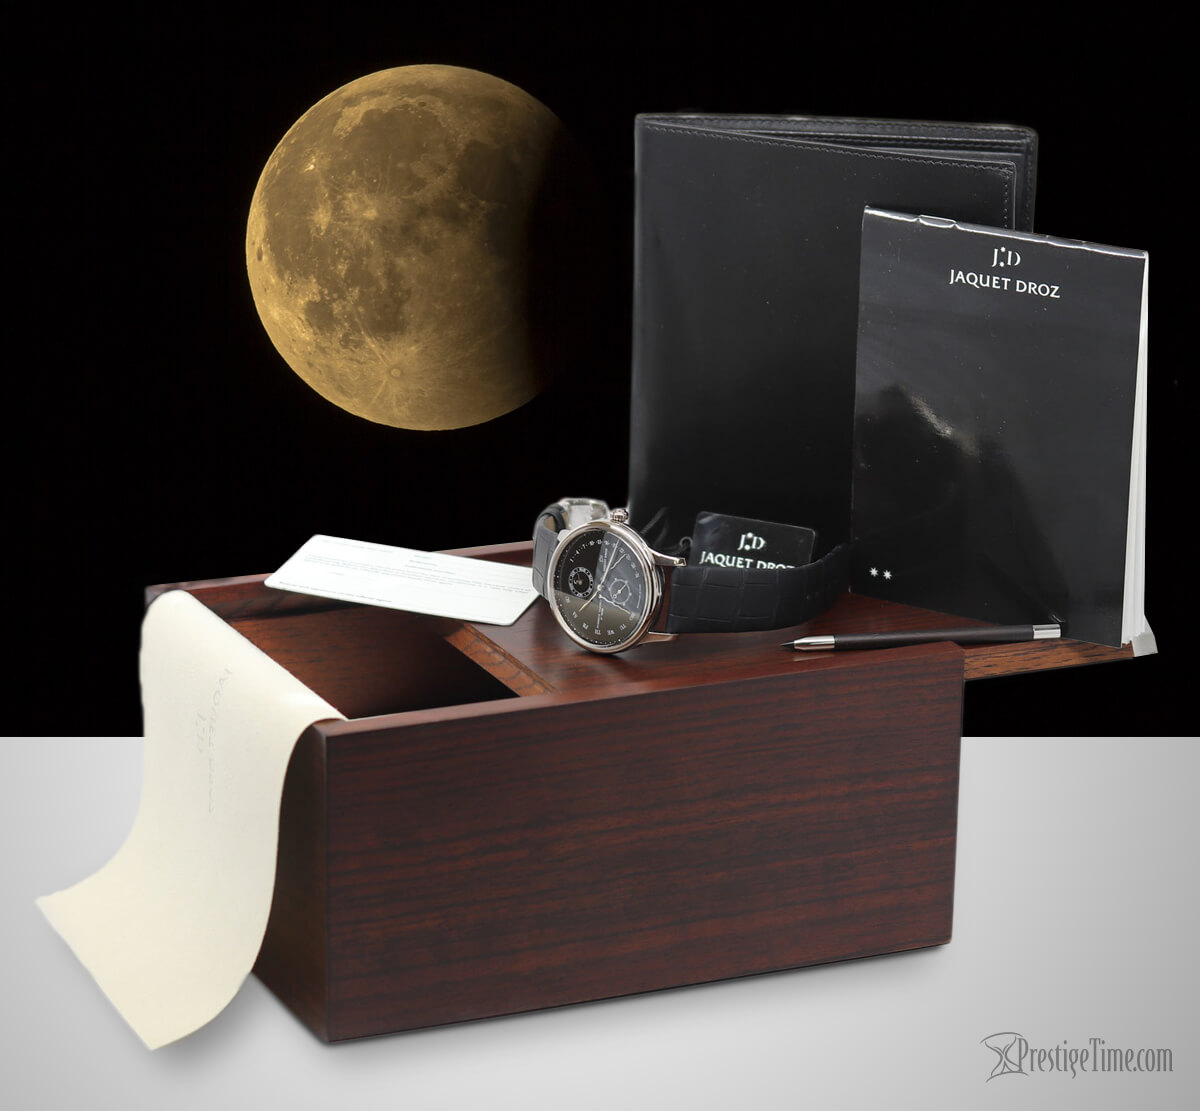 Jaquet Droz Astrale Perpetual Calendar box and packaging